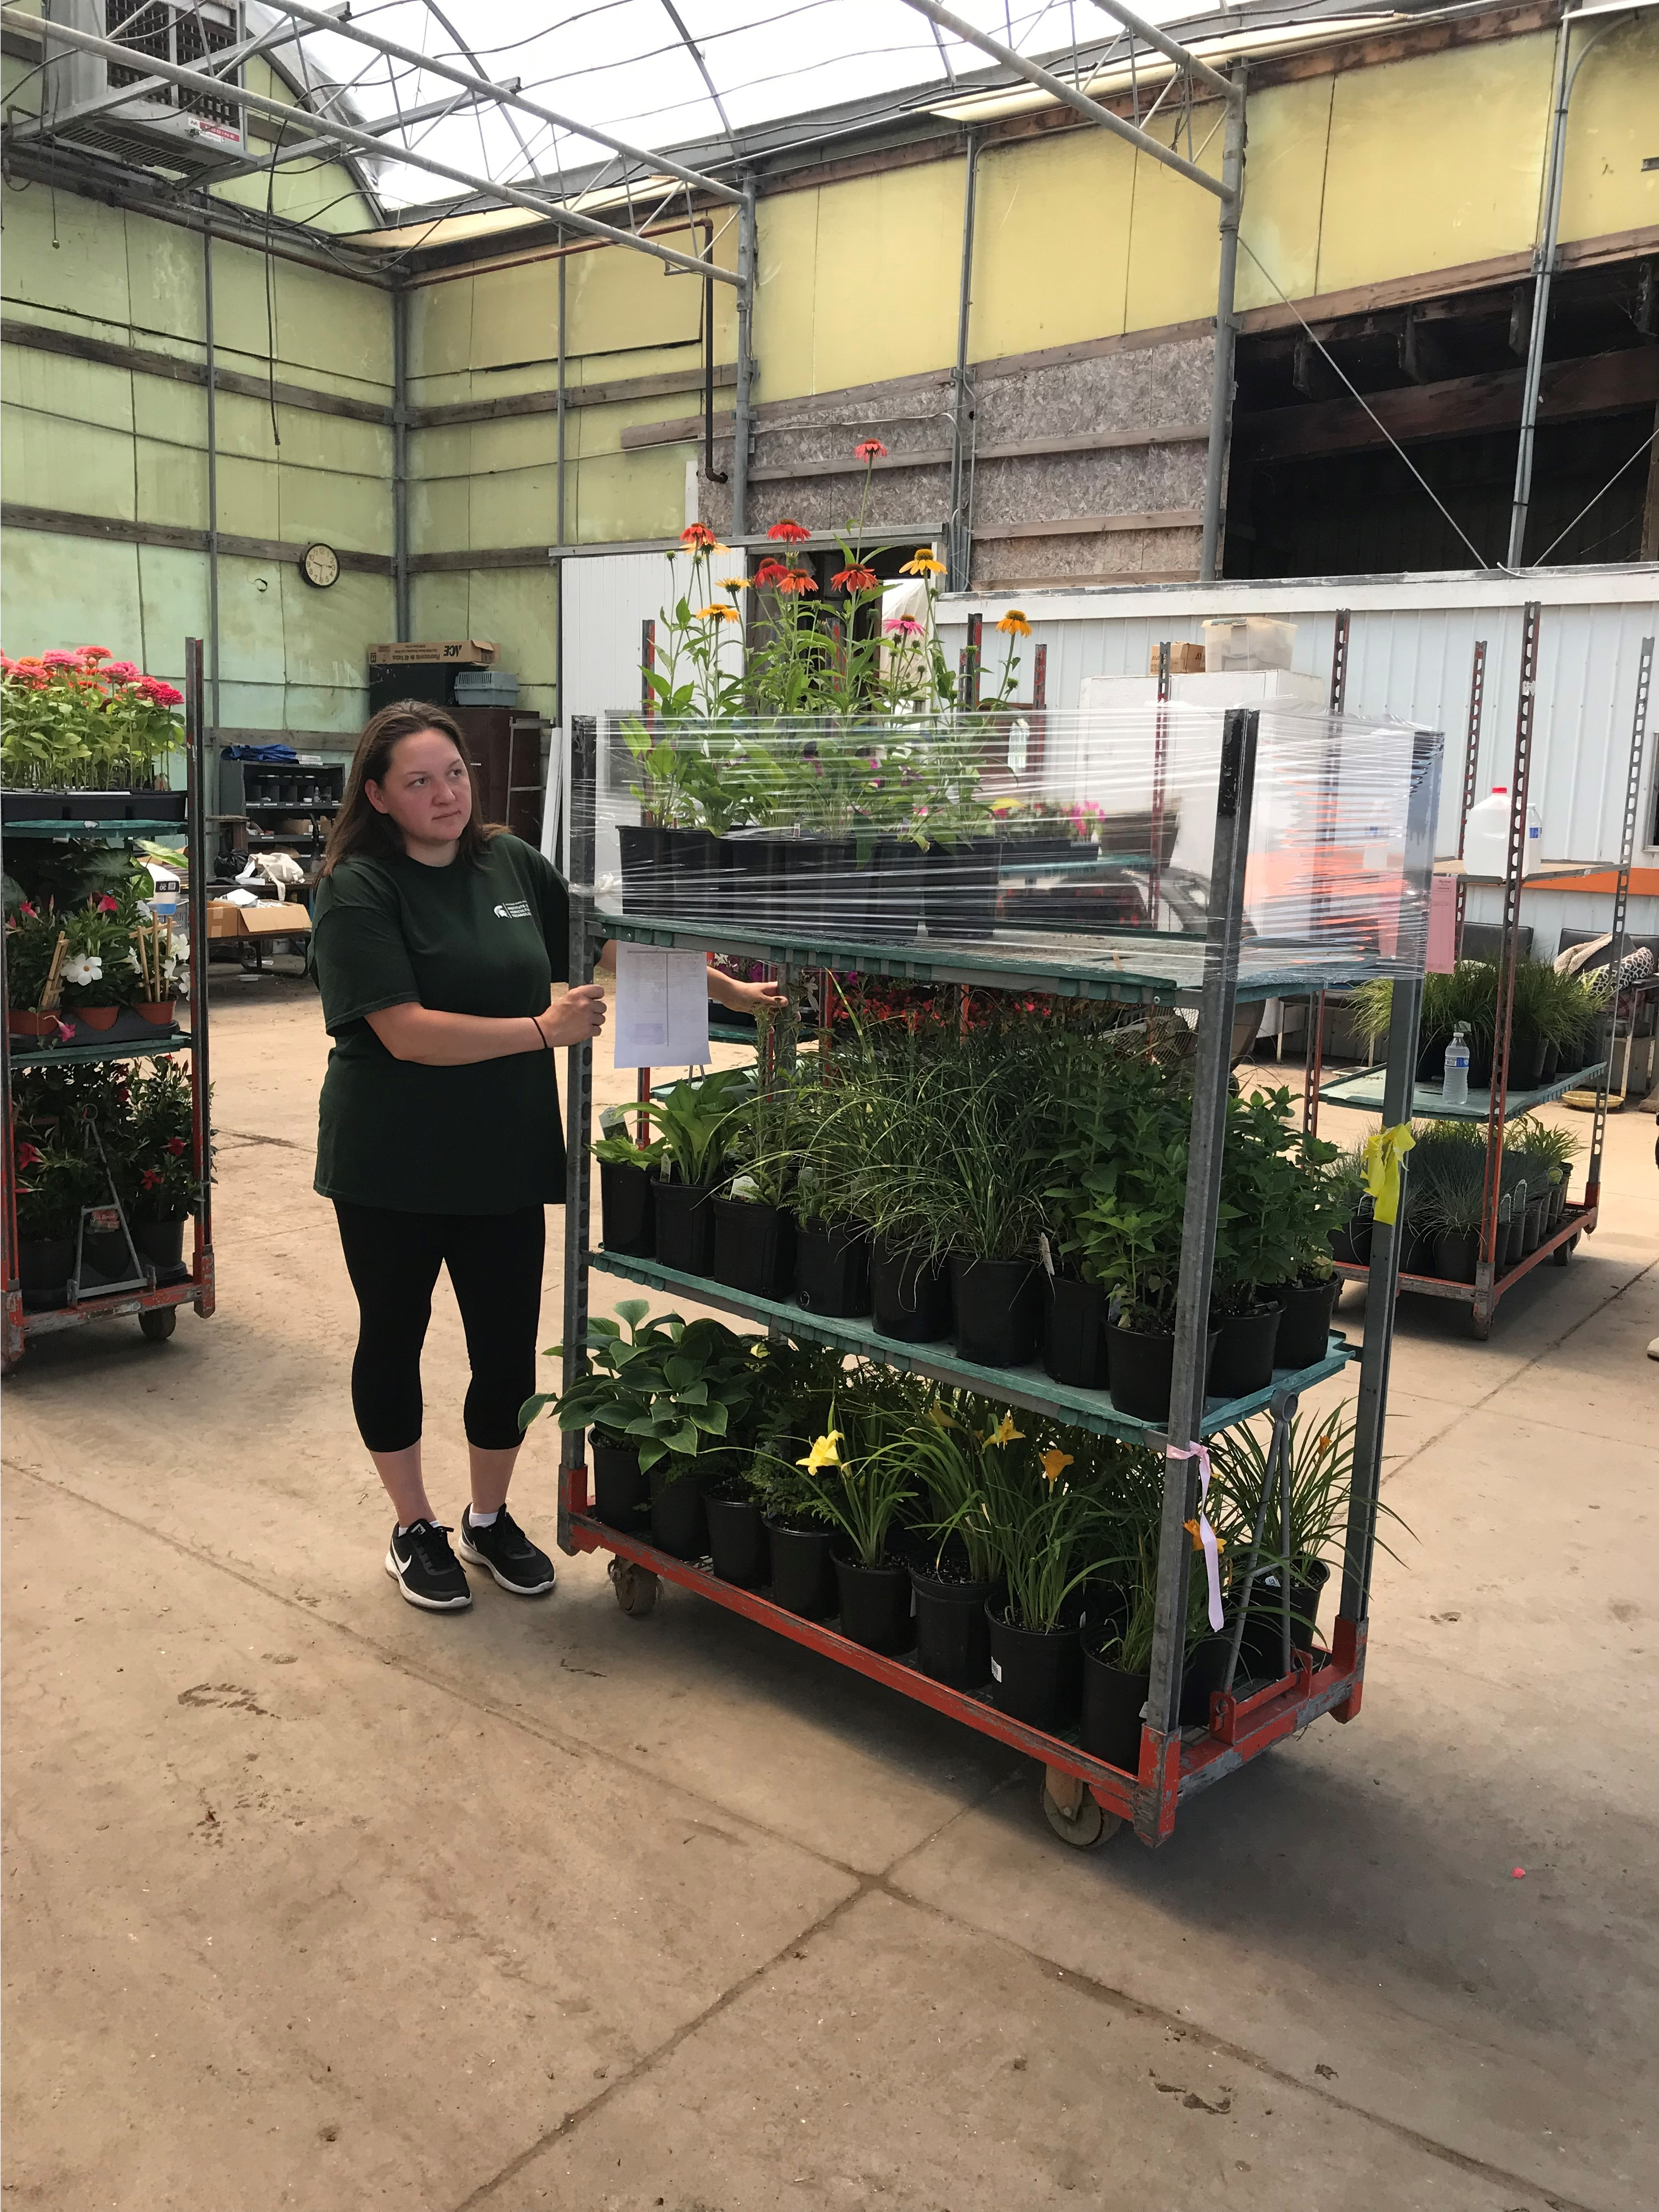 Landscape management student Danielle Dunn pushes a cart of plants at Moose & Squirrel Horticultural Resources Greenhouse in Carleton, Michigan.